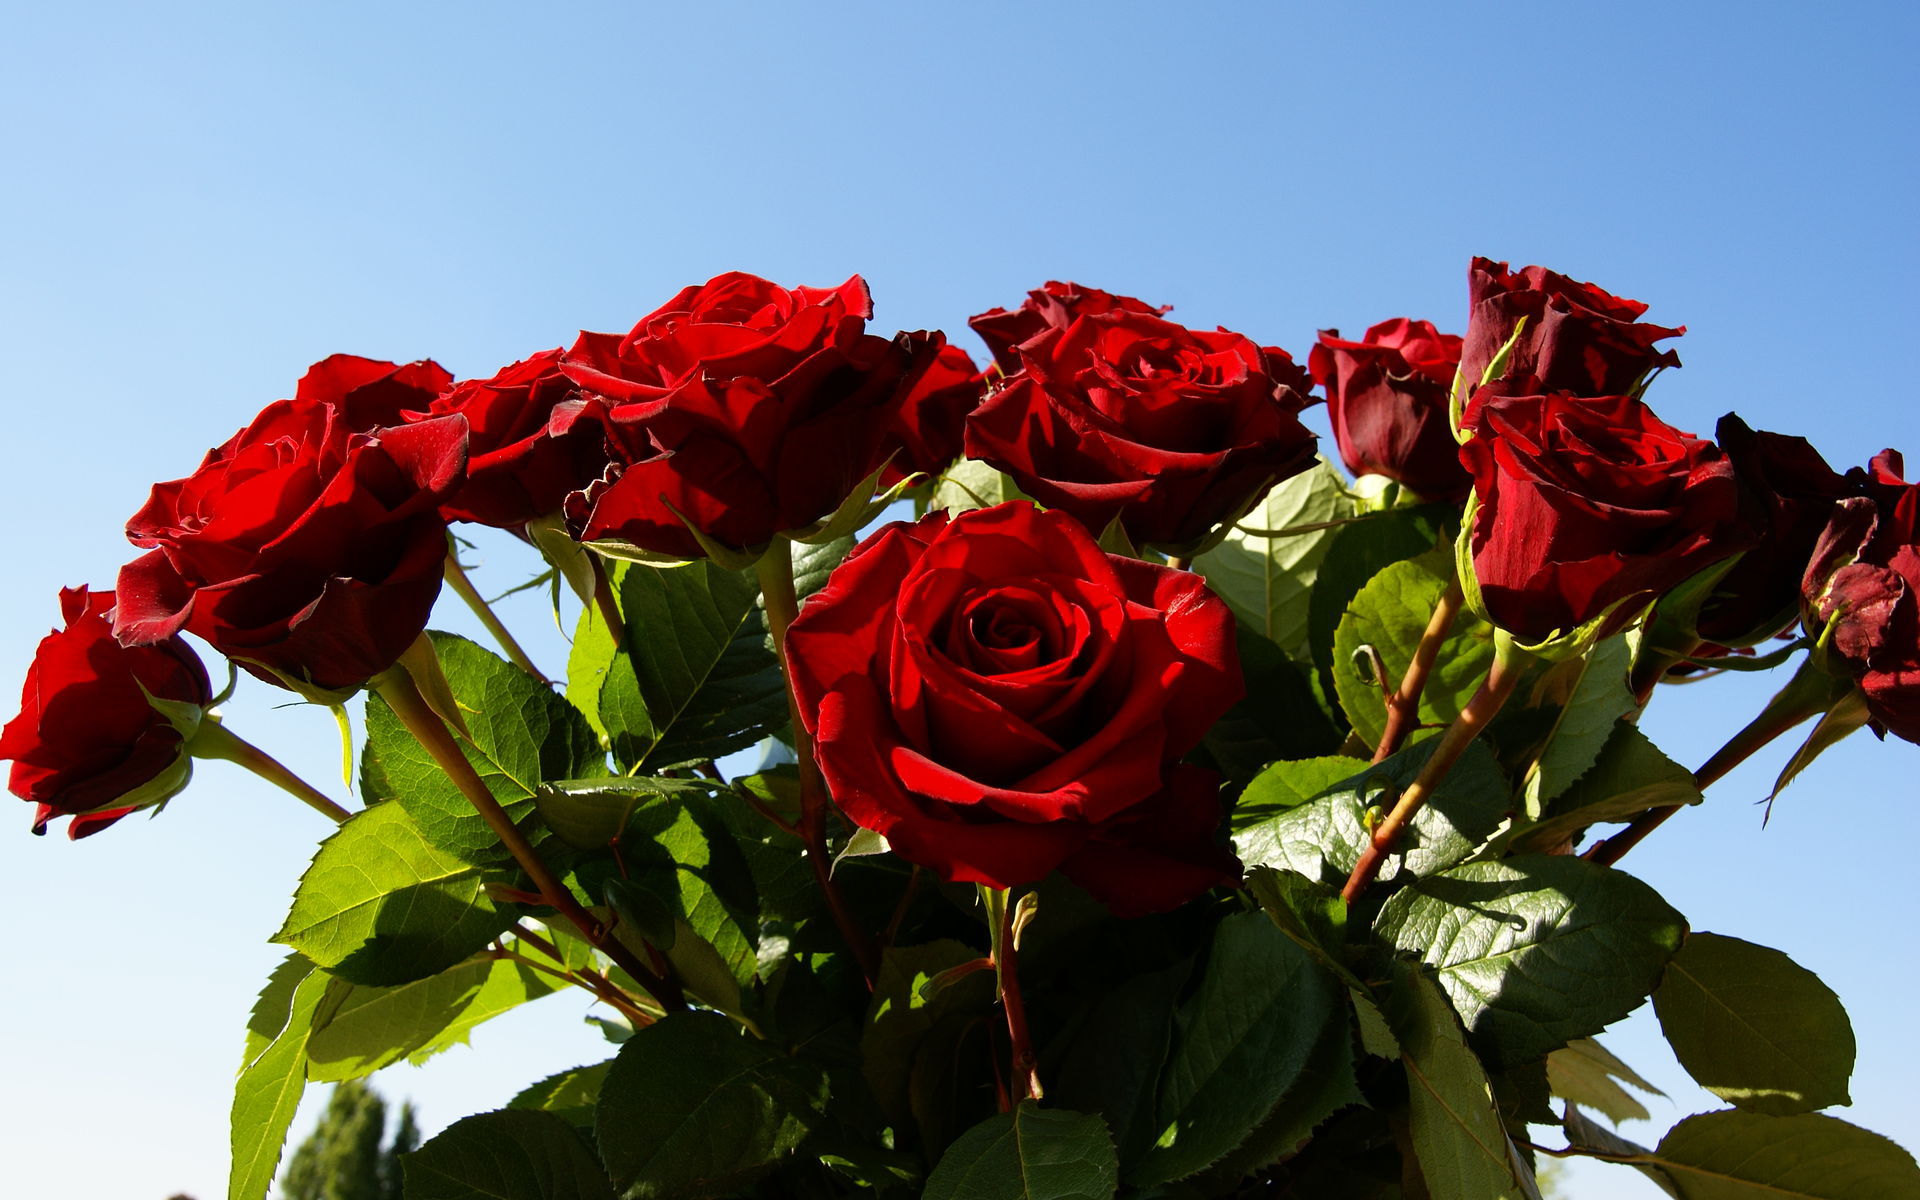 holidays-international-womens-day-red-roses-on-march-8-against-the-sky-060661.jpg